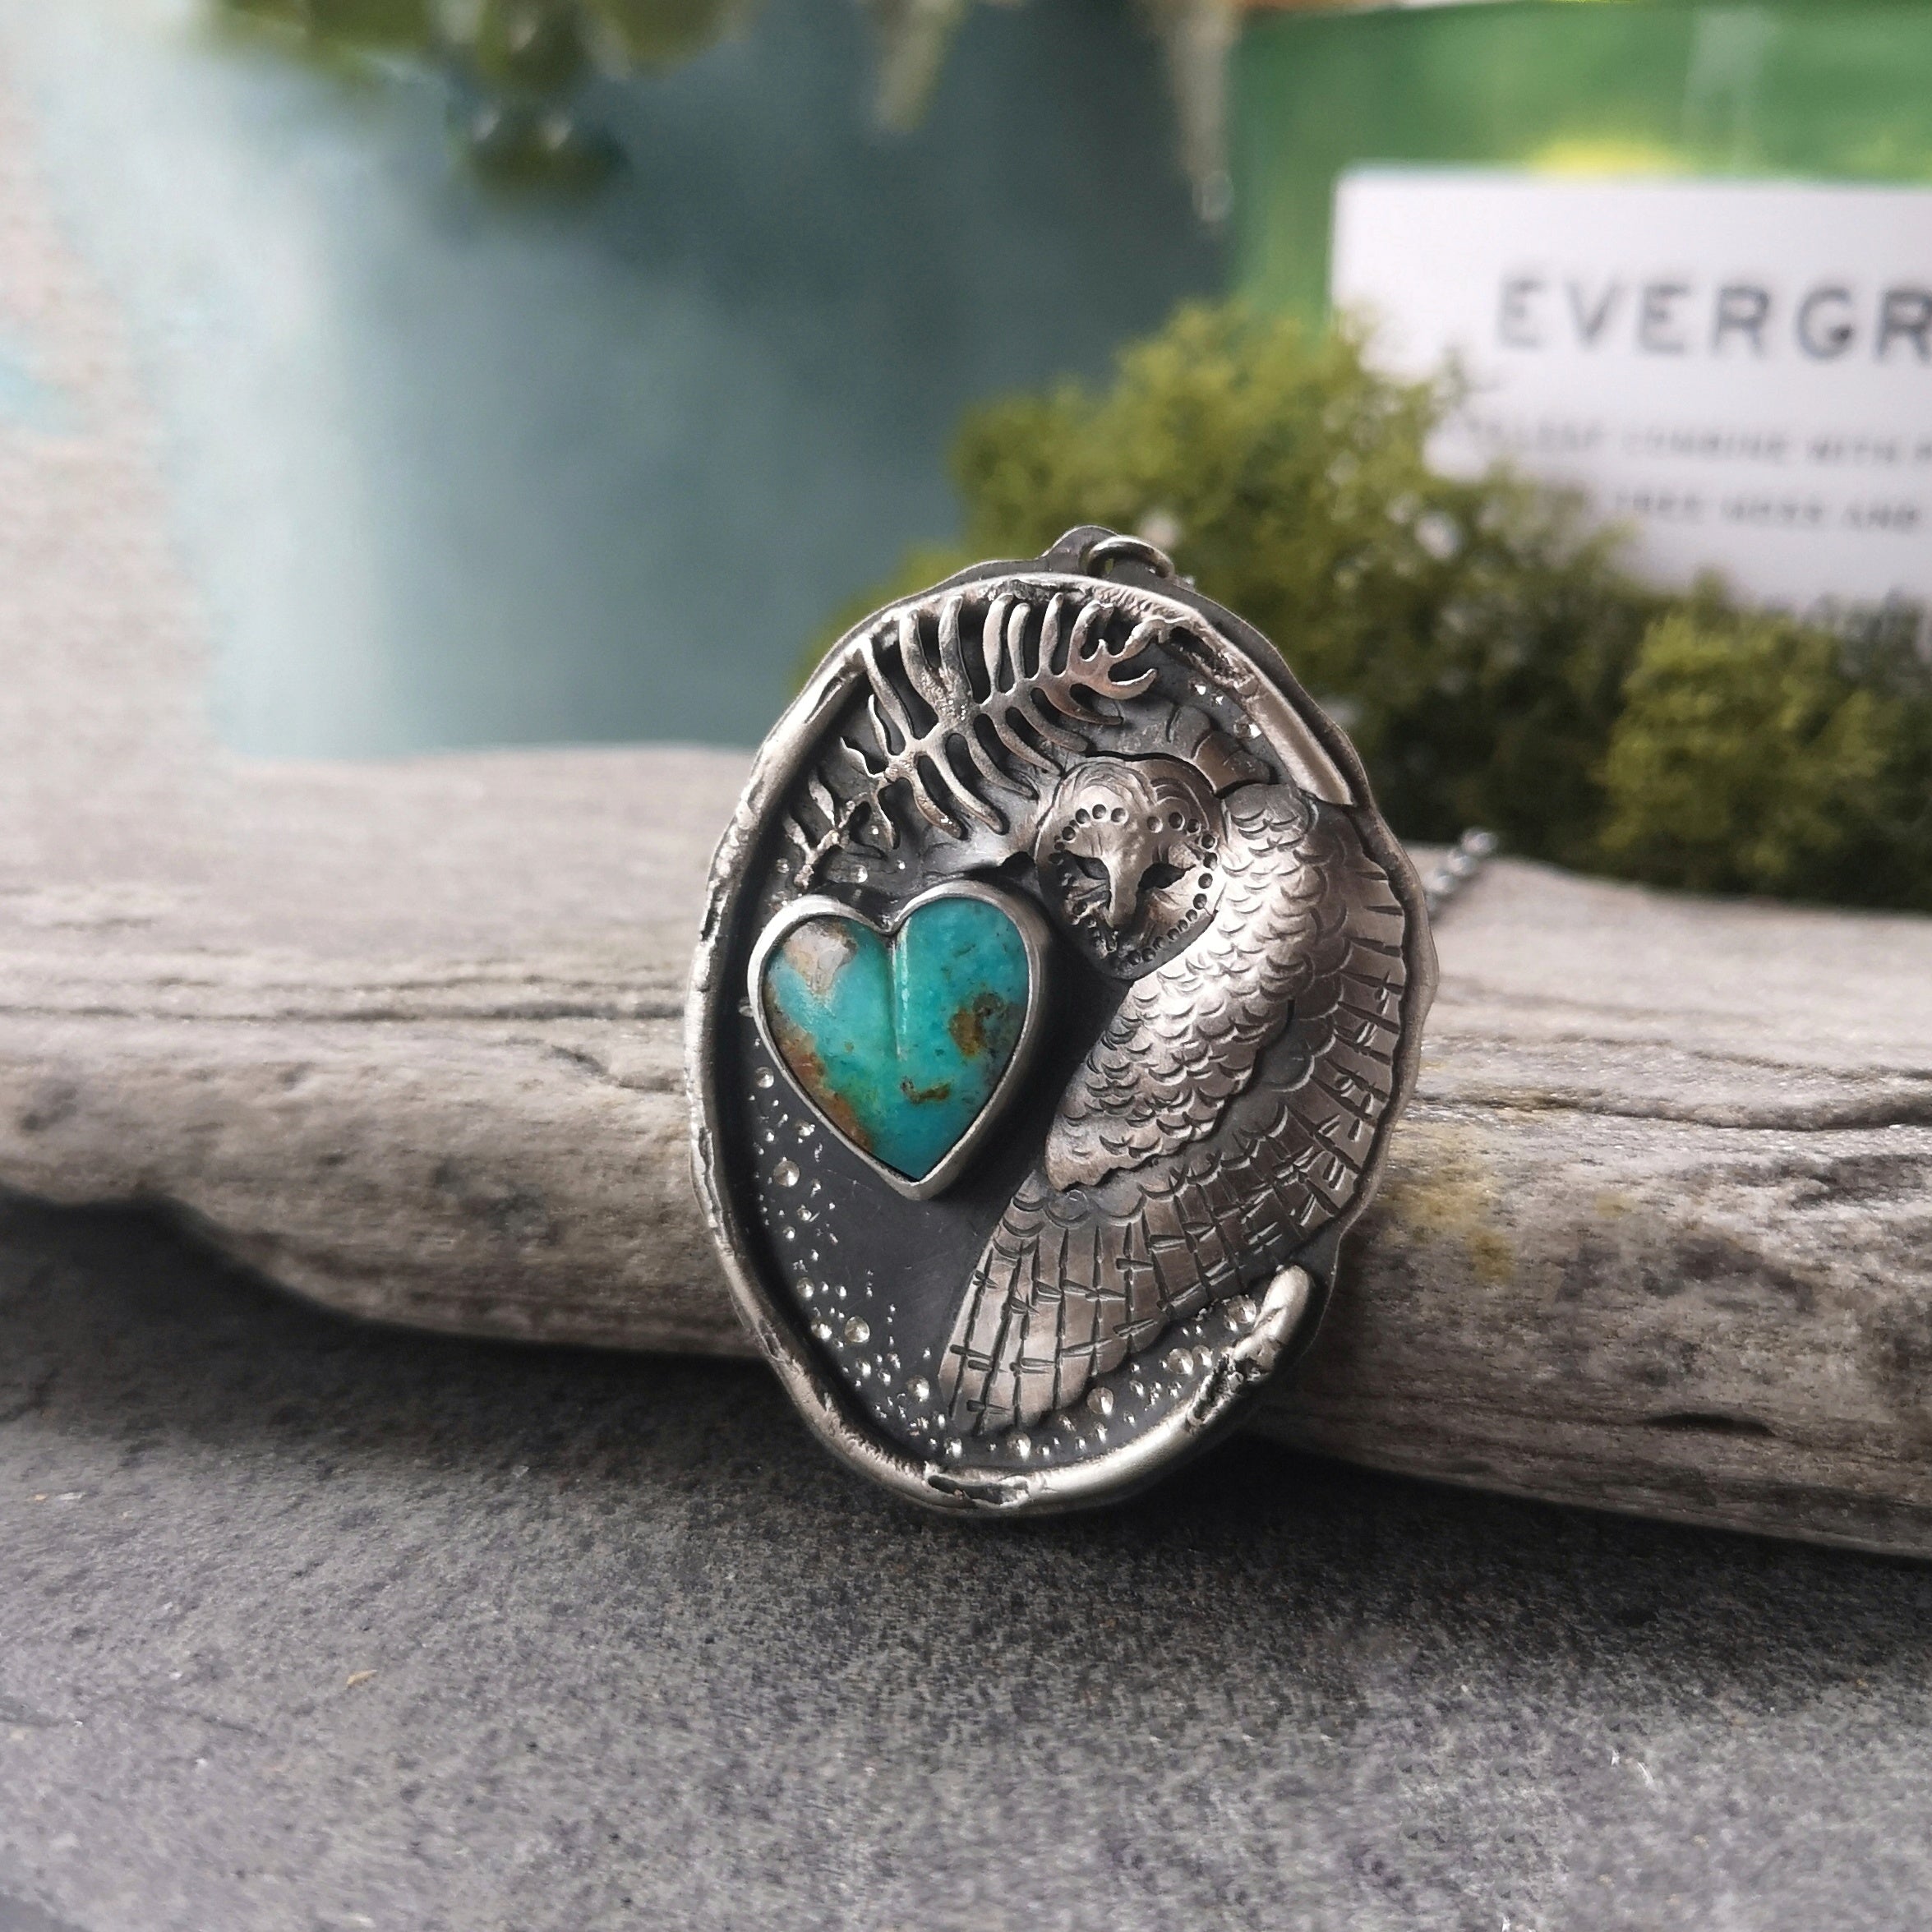 The Barn Owl Necklace - Turquoise Heart